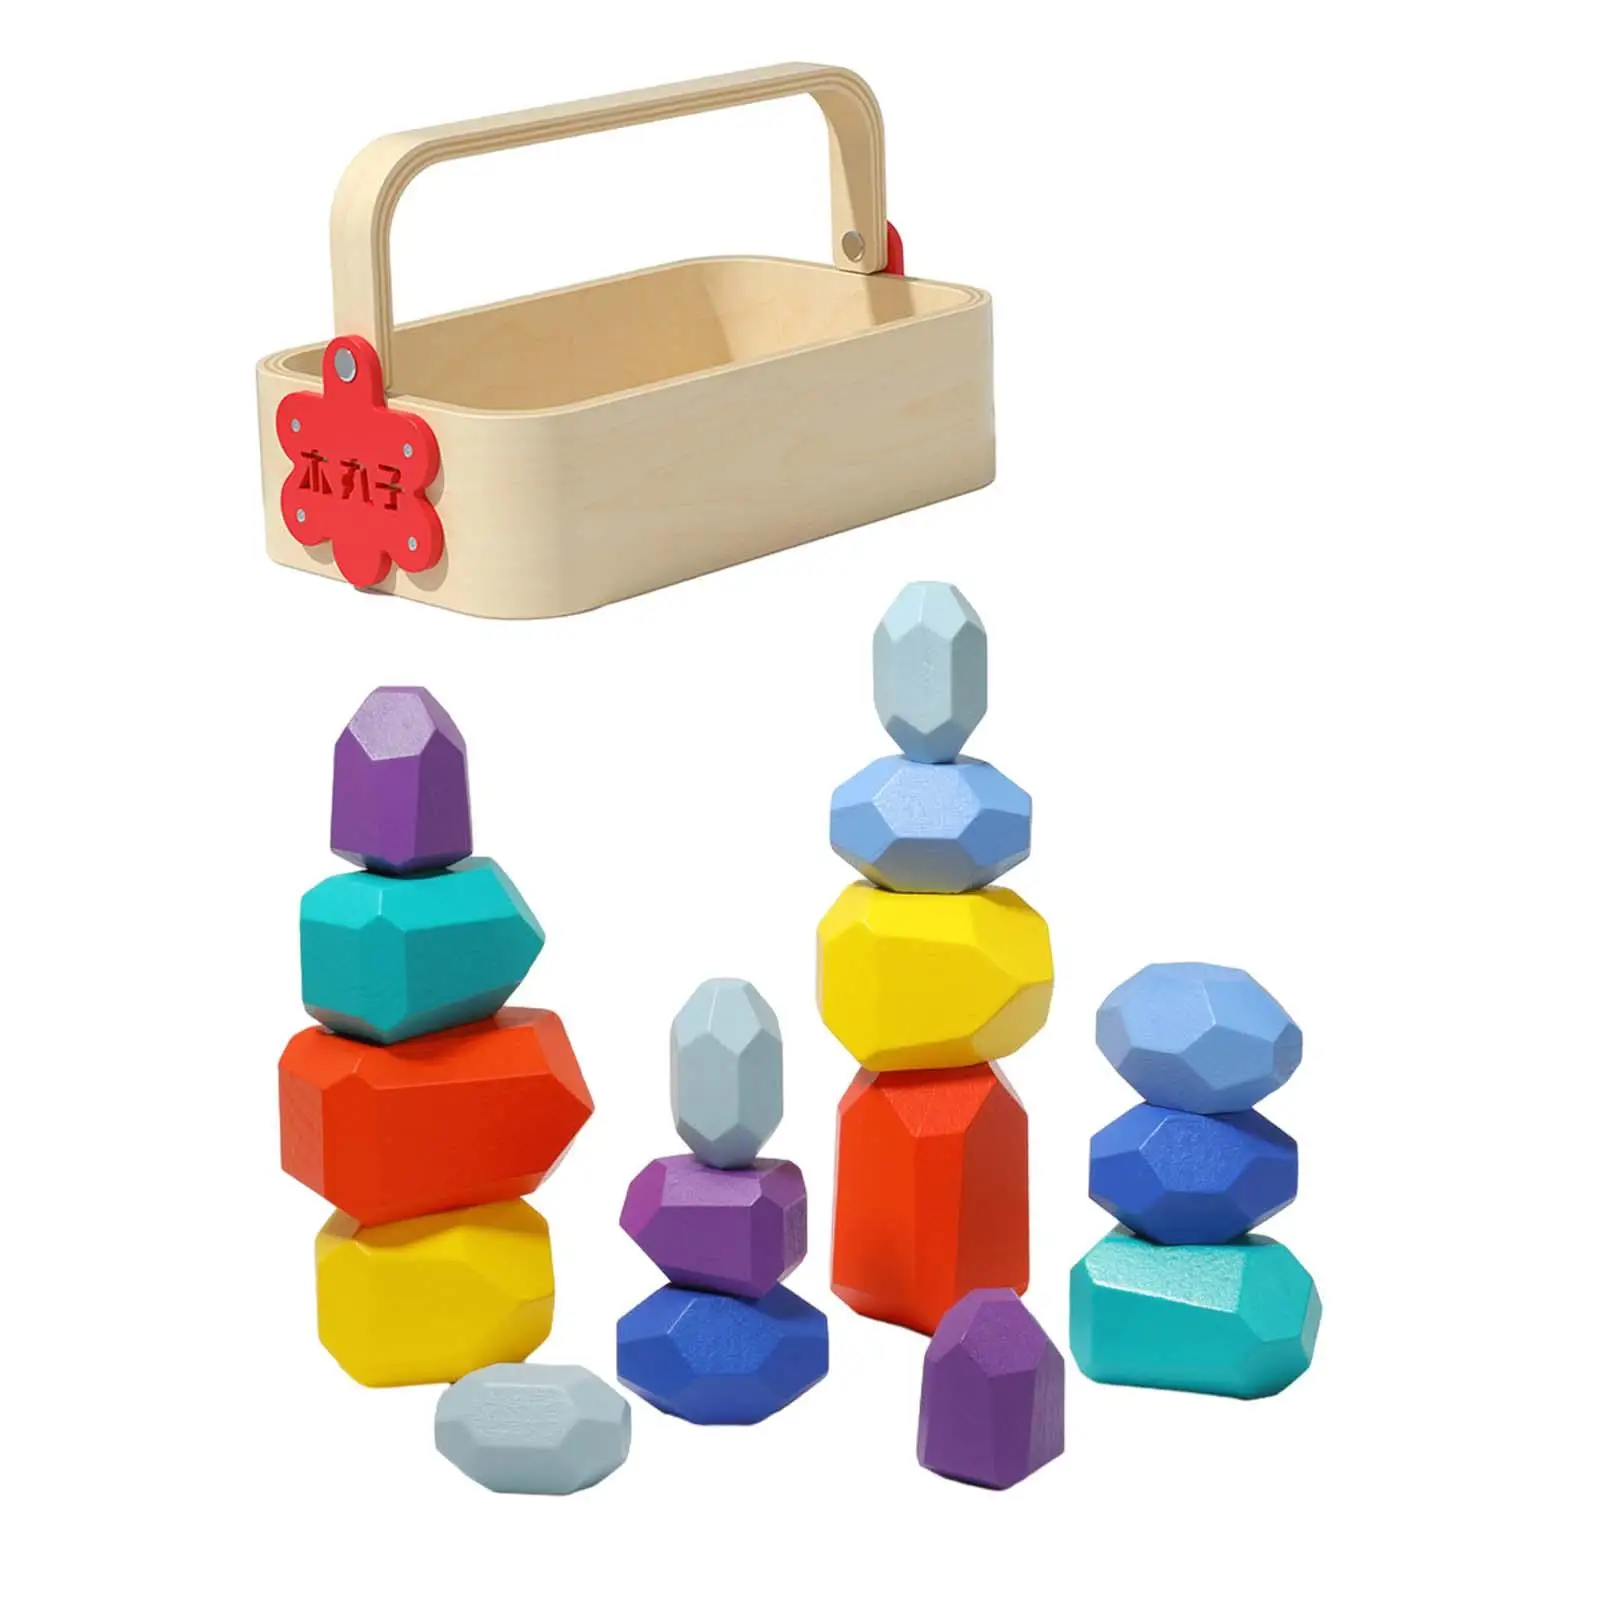 Stacking Blocks Hands on Puzzle Toys with Storage Case Balance Stones Wood for Girls Boys Children Kid 3 Years up Birthday Gifts